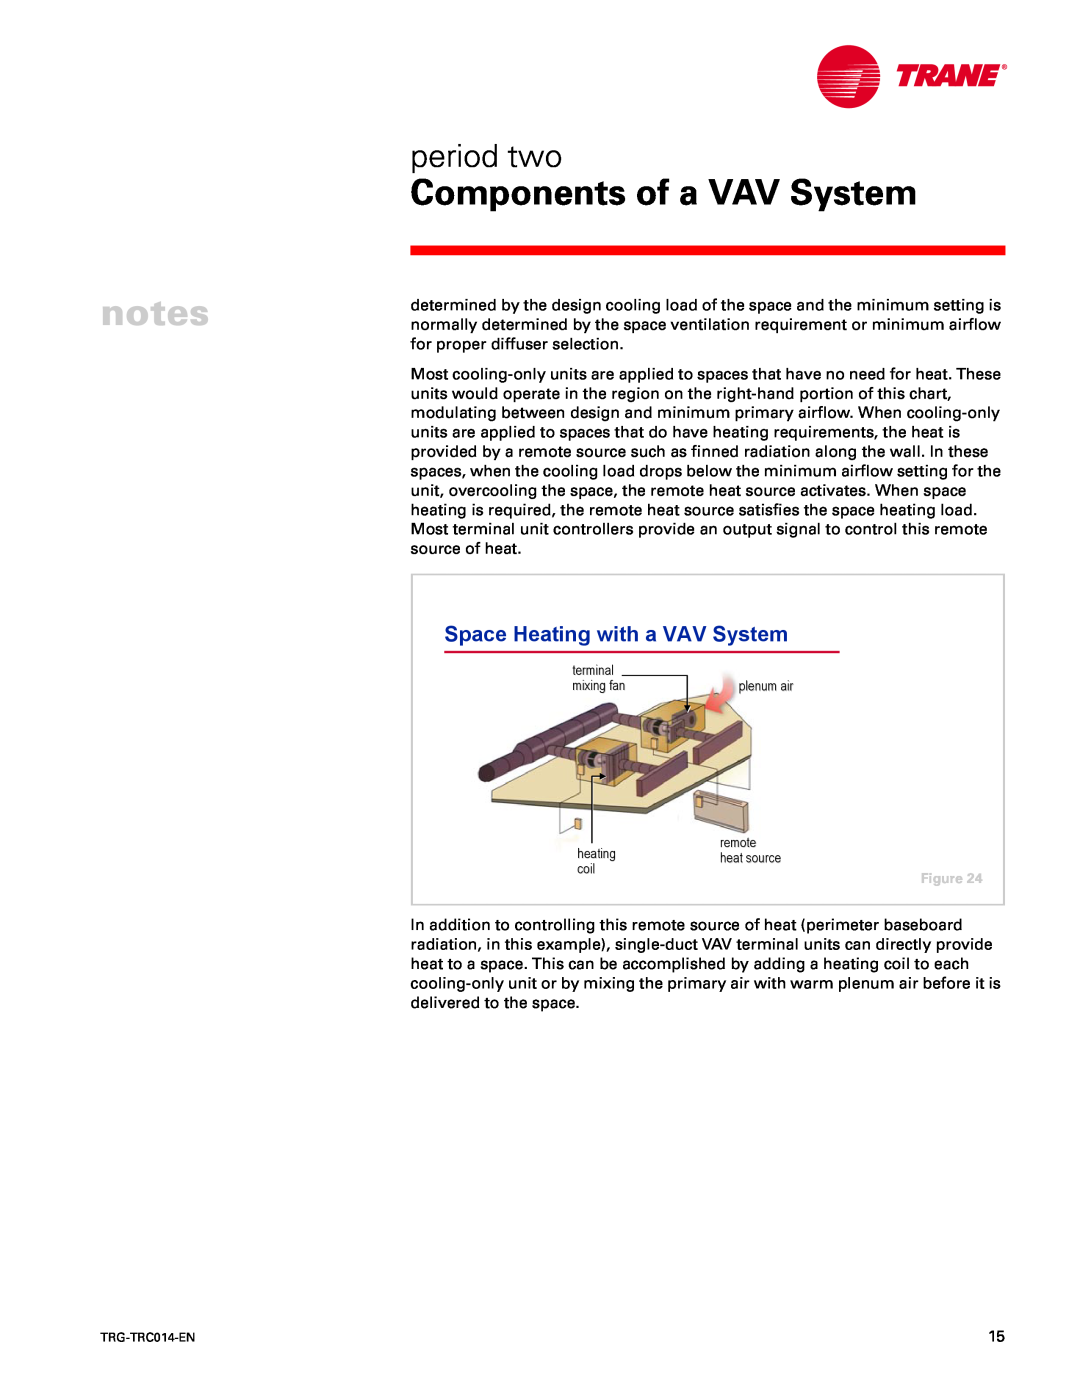 Trane TRG-TRC014-EN manual Space Heating with a VAV System, Components of a VAV System, period two 